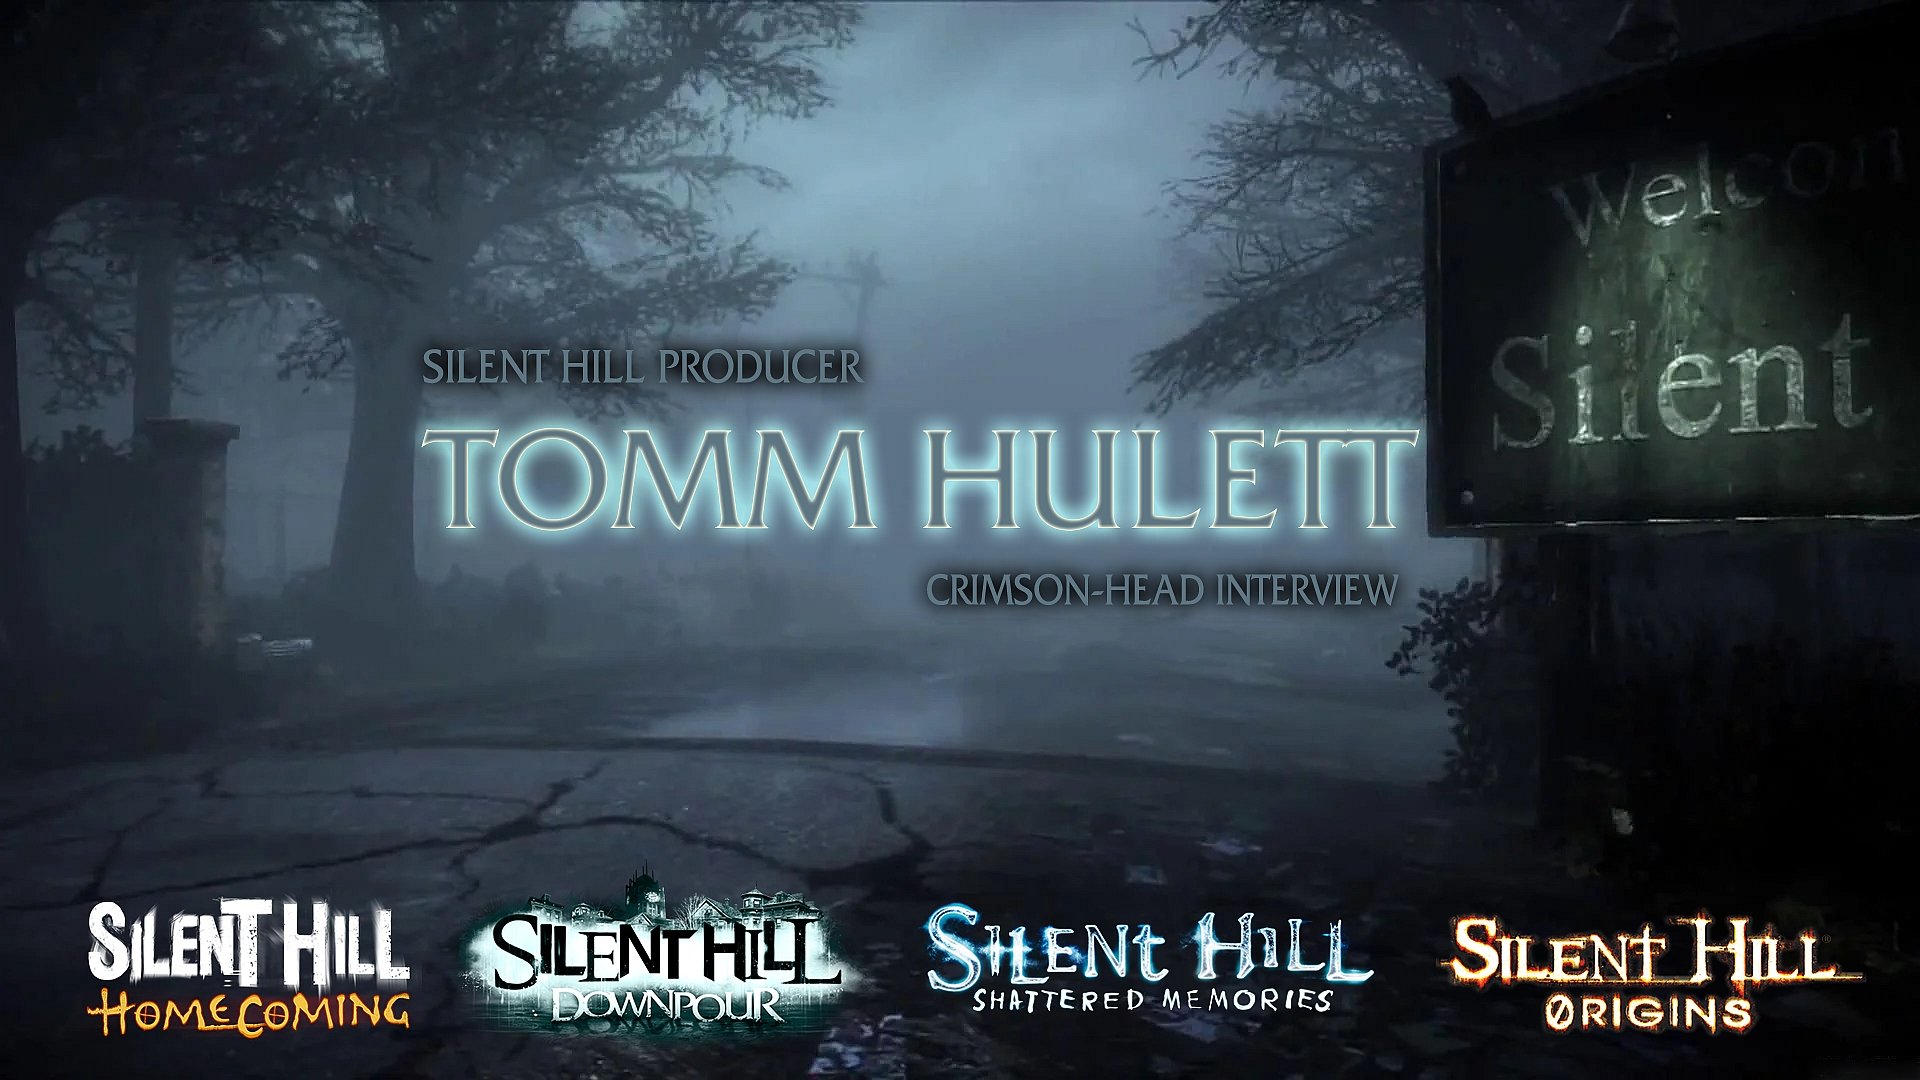 Crimson-Head Podcast #29 with Silent Hill series producer Tomm Hulett!